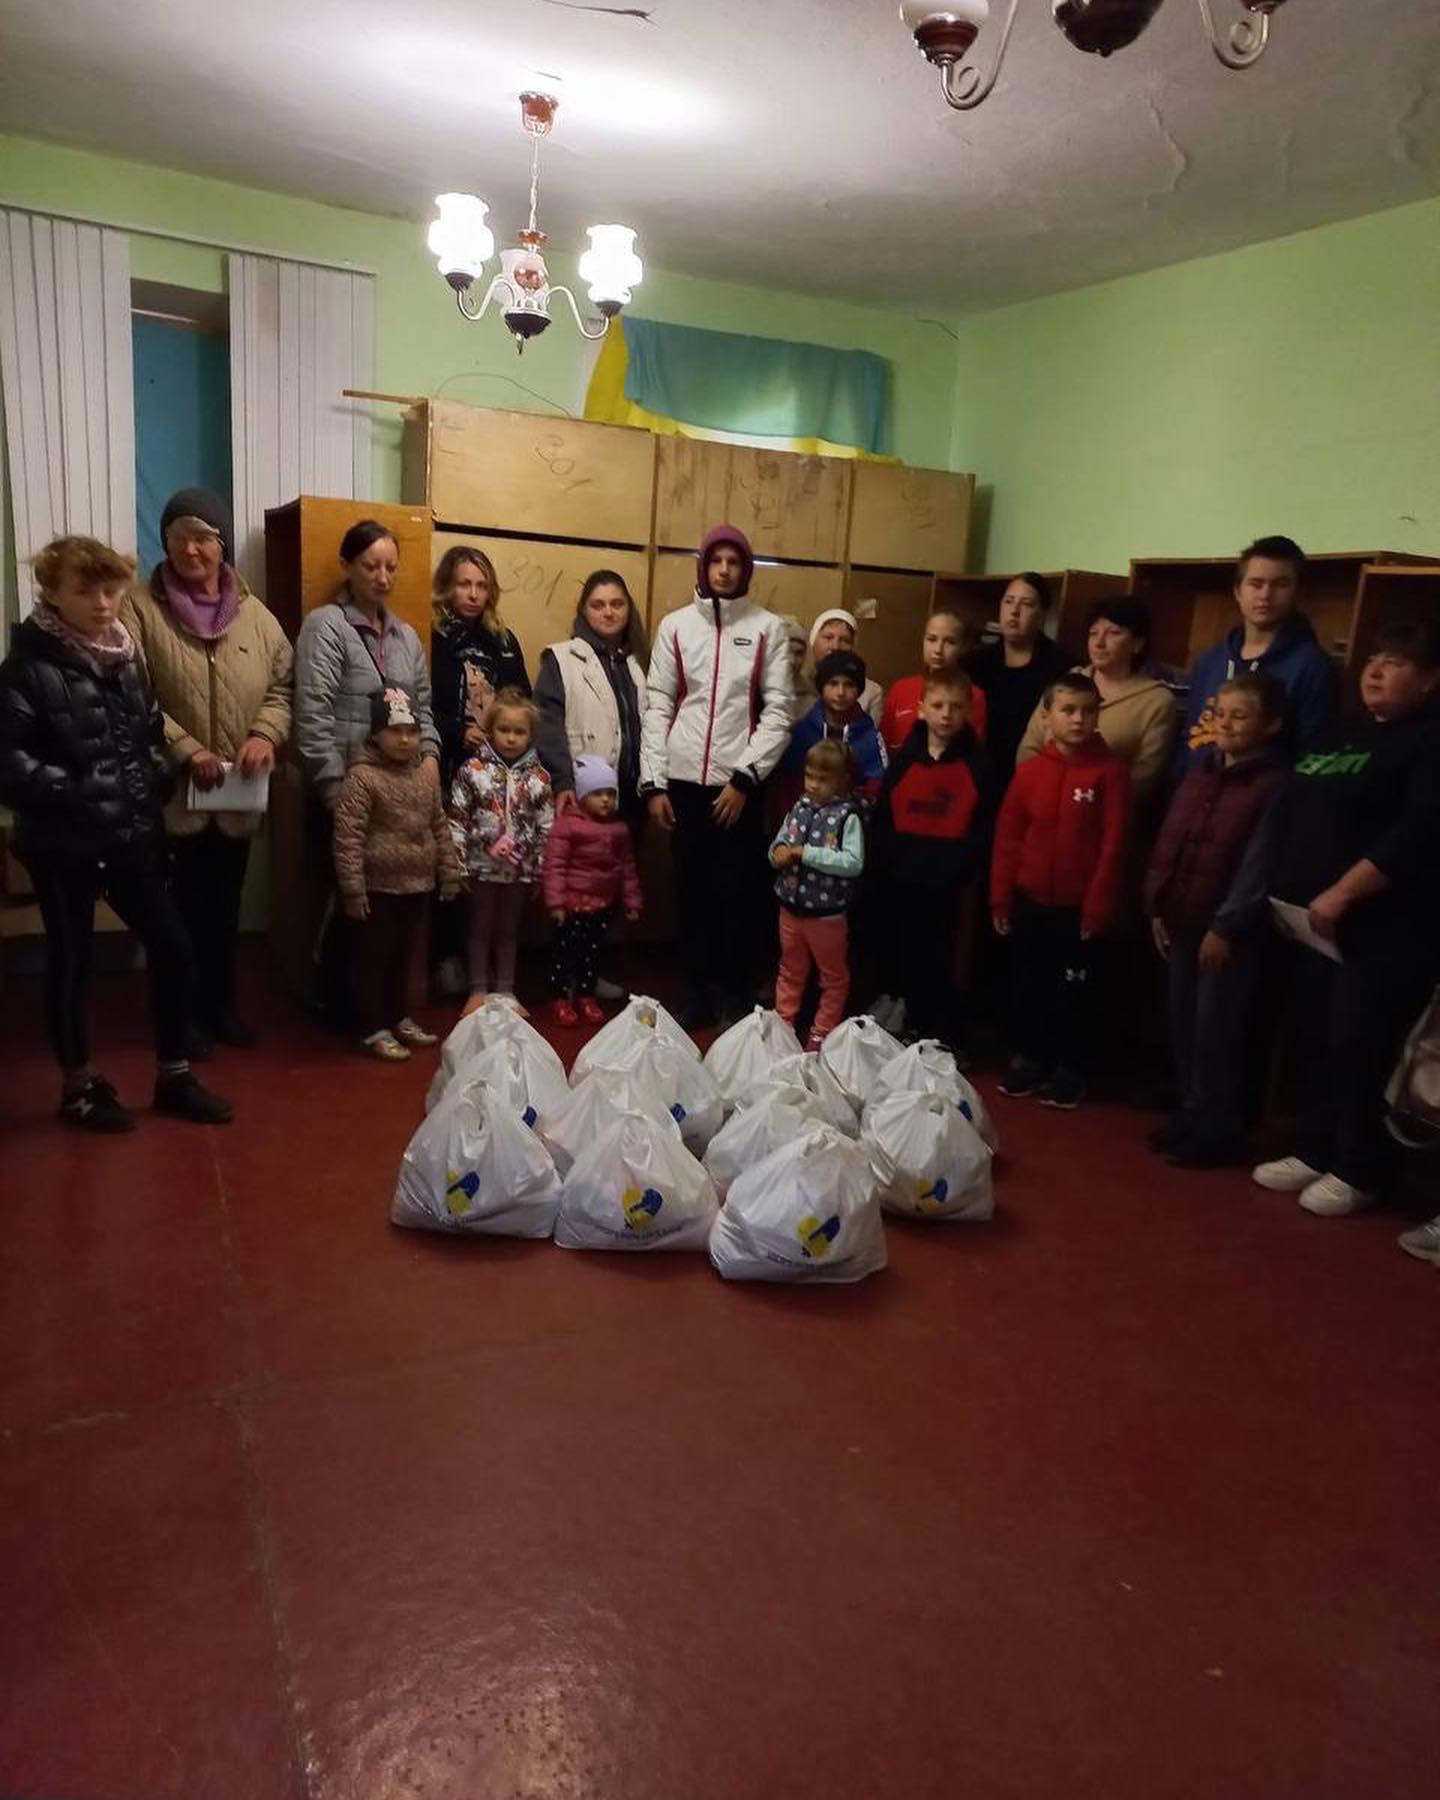 A group of people standing in a room with bags.